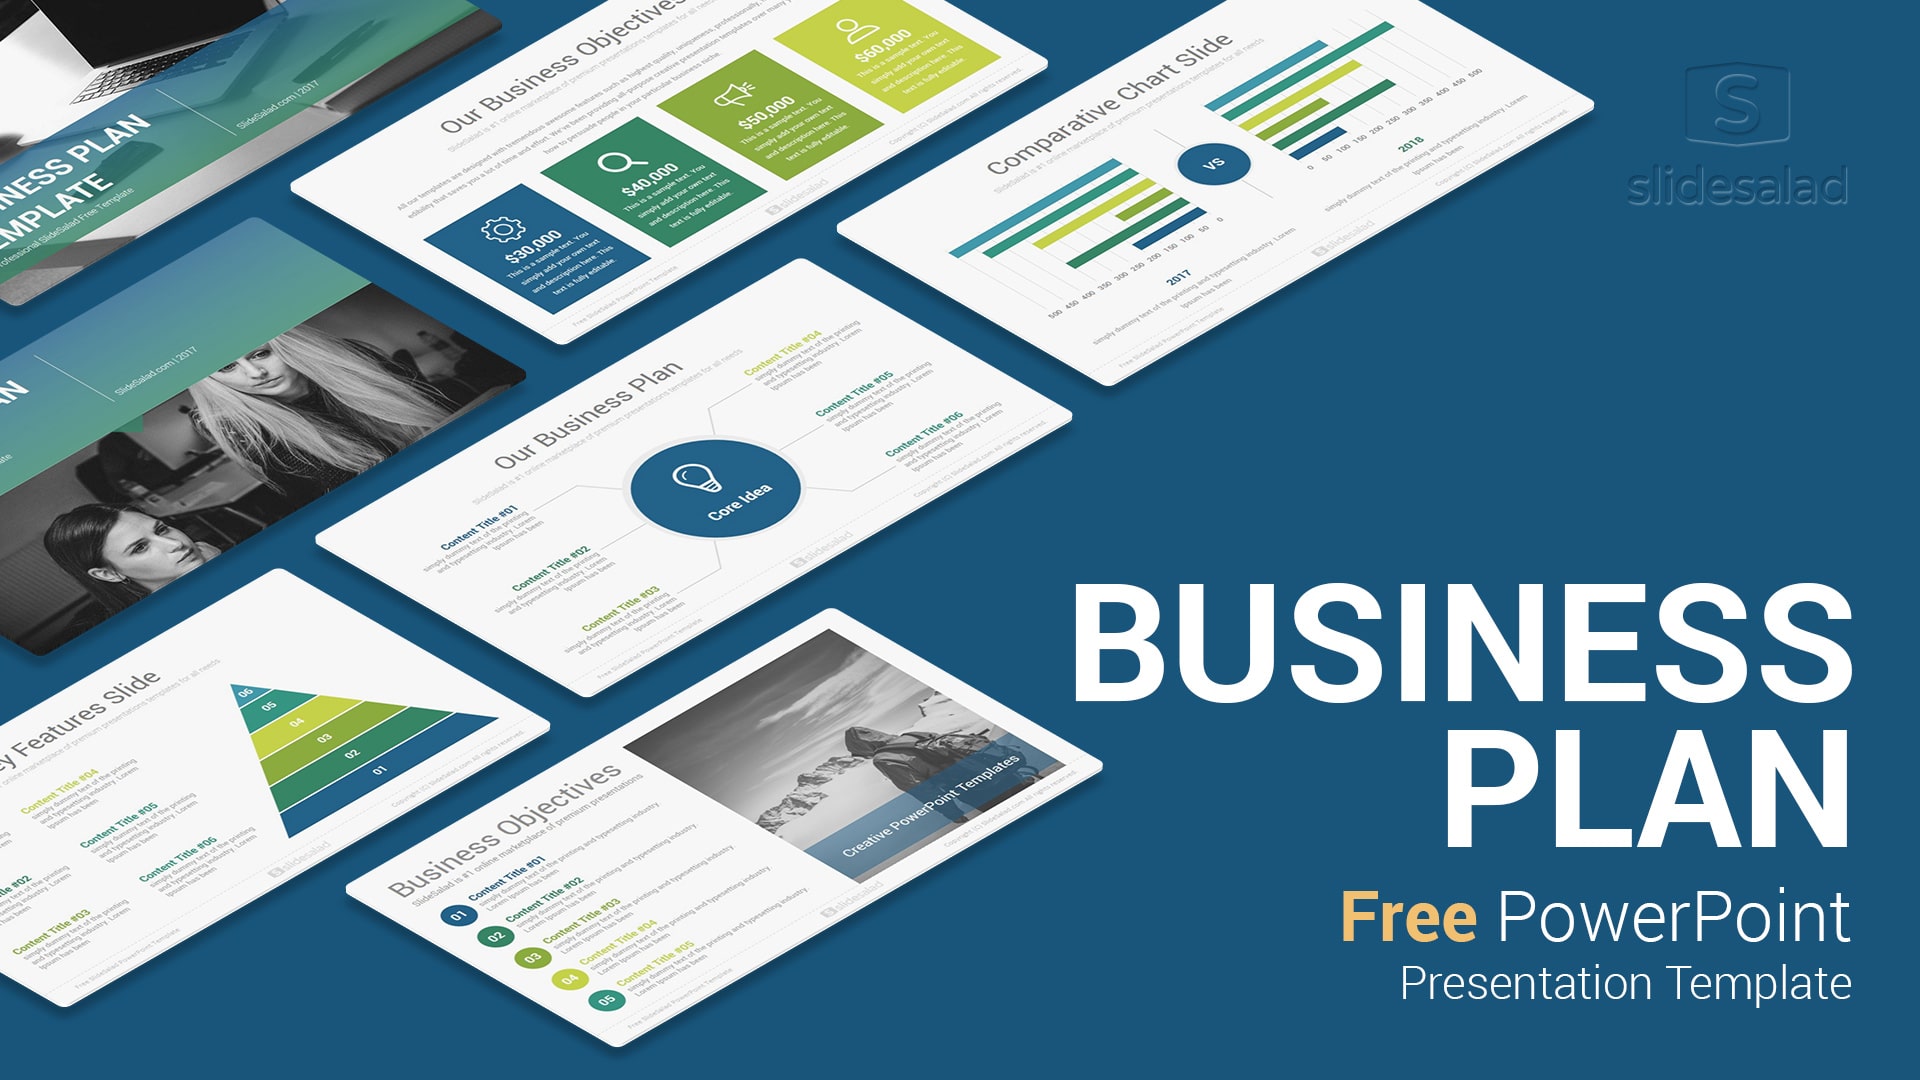 Business Plan Free PowerPoint Presentation Template - SlideSalad With Regard To Ppt Templates For Business Presentation Free Download